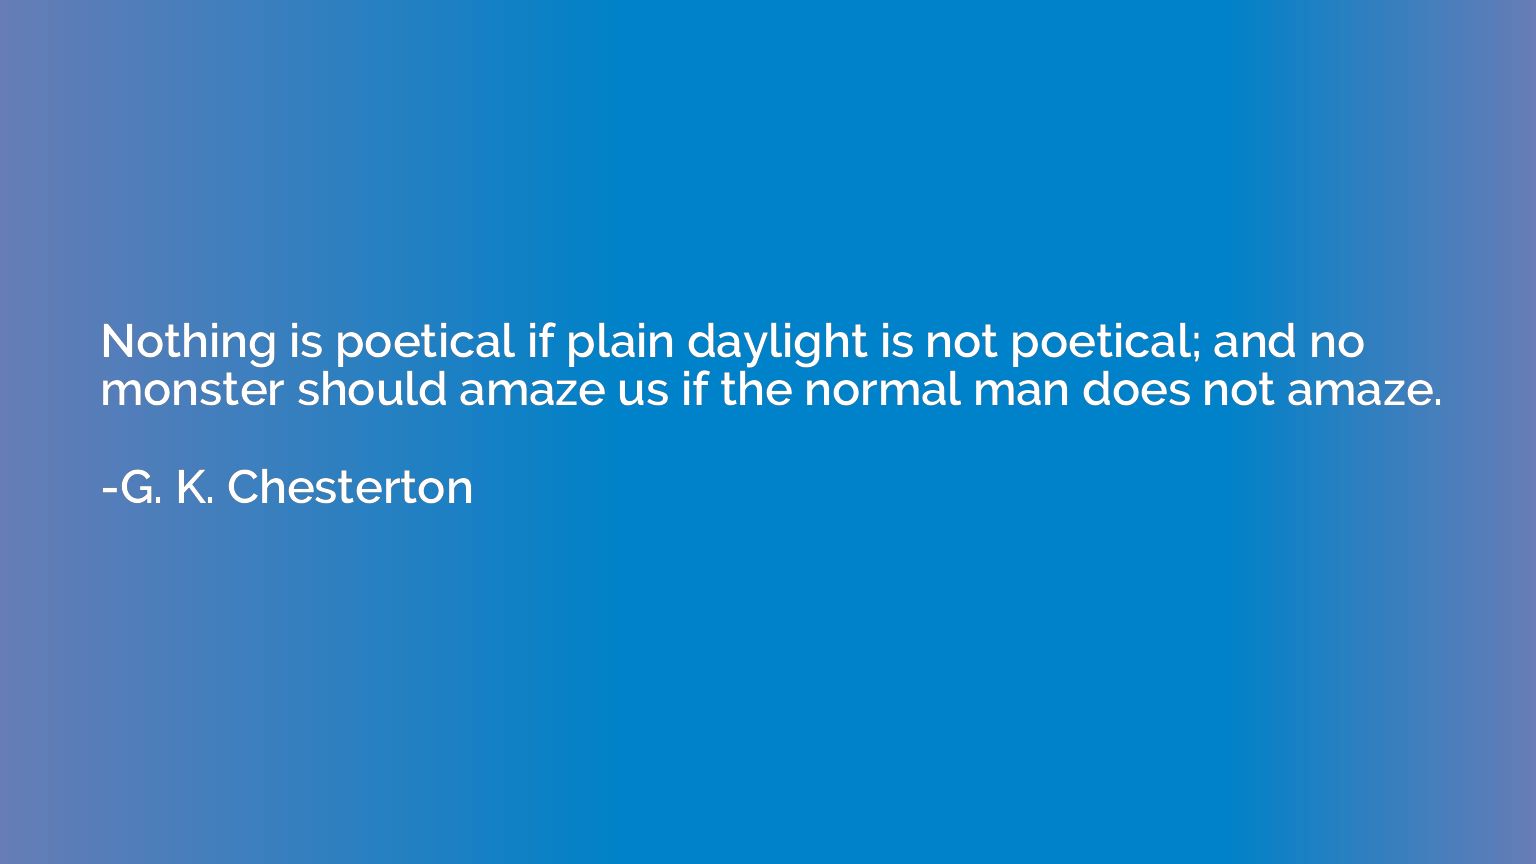 Nothing is poetical if plain daylight is not poetical; and n